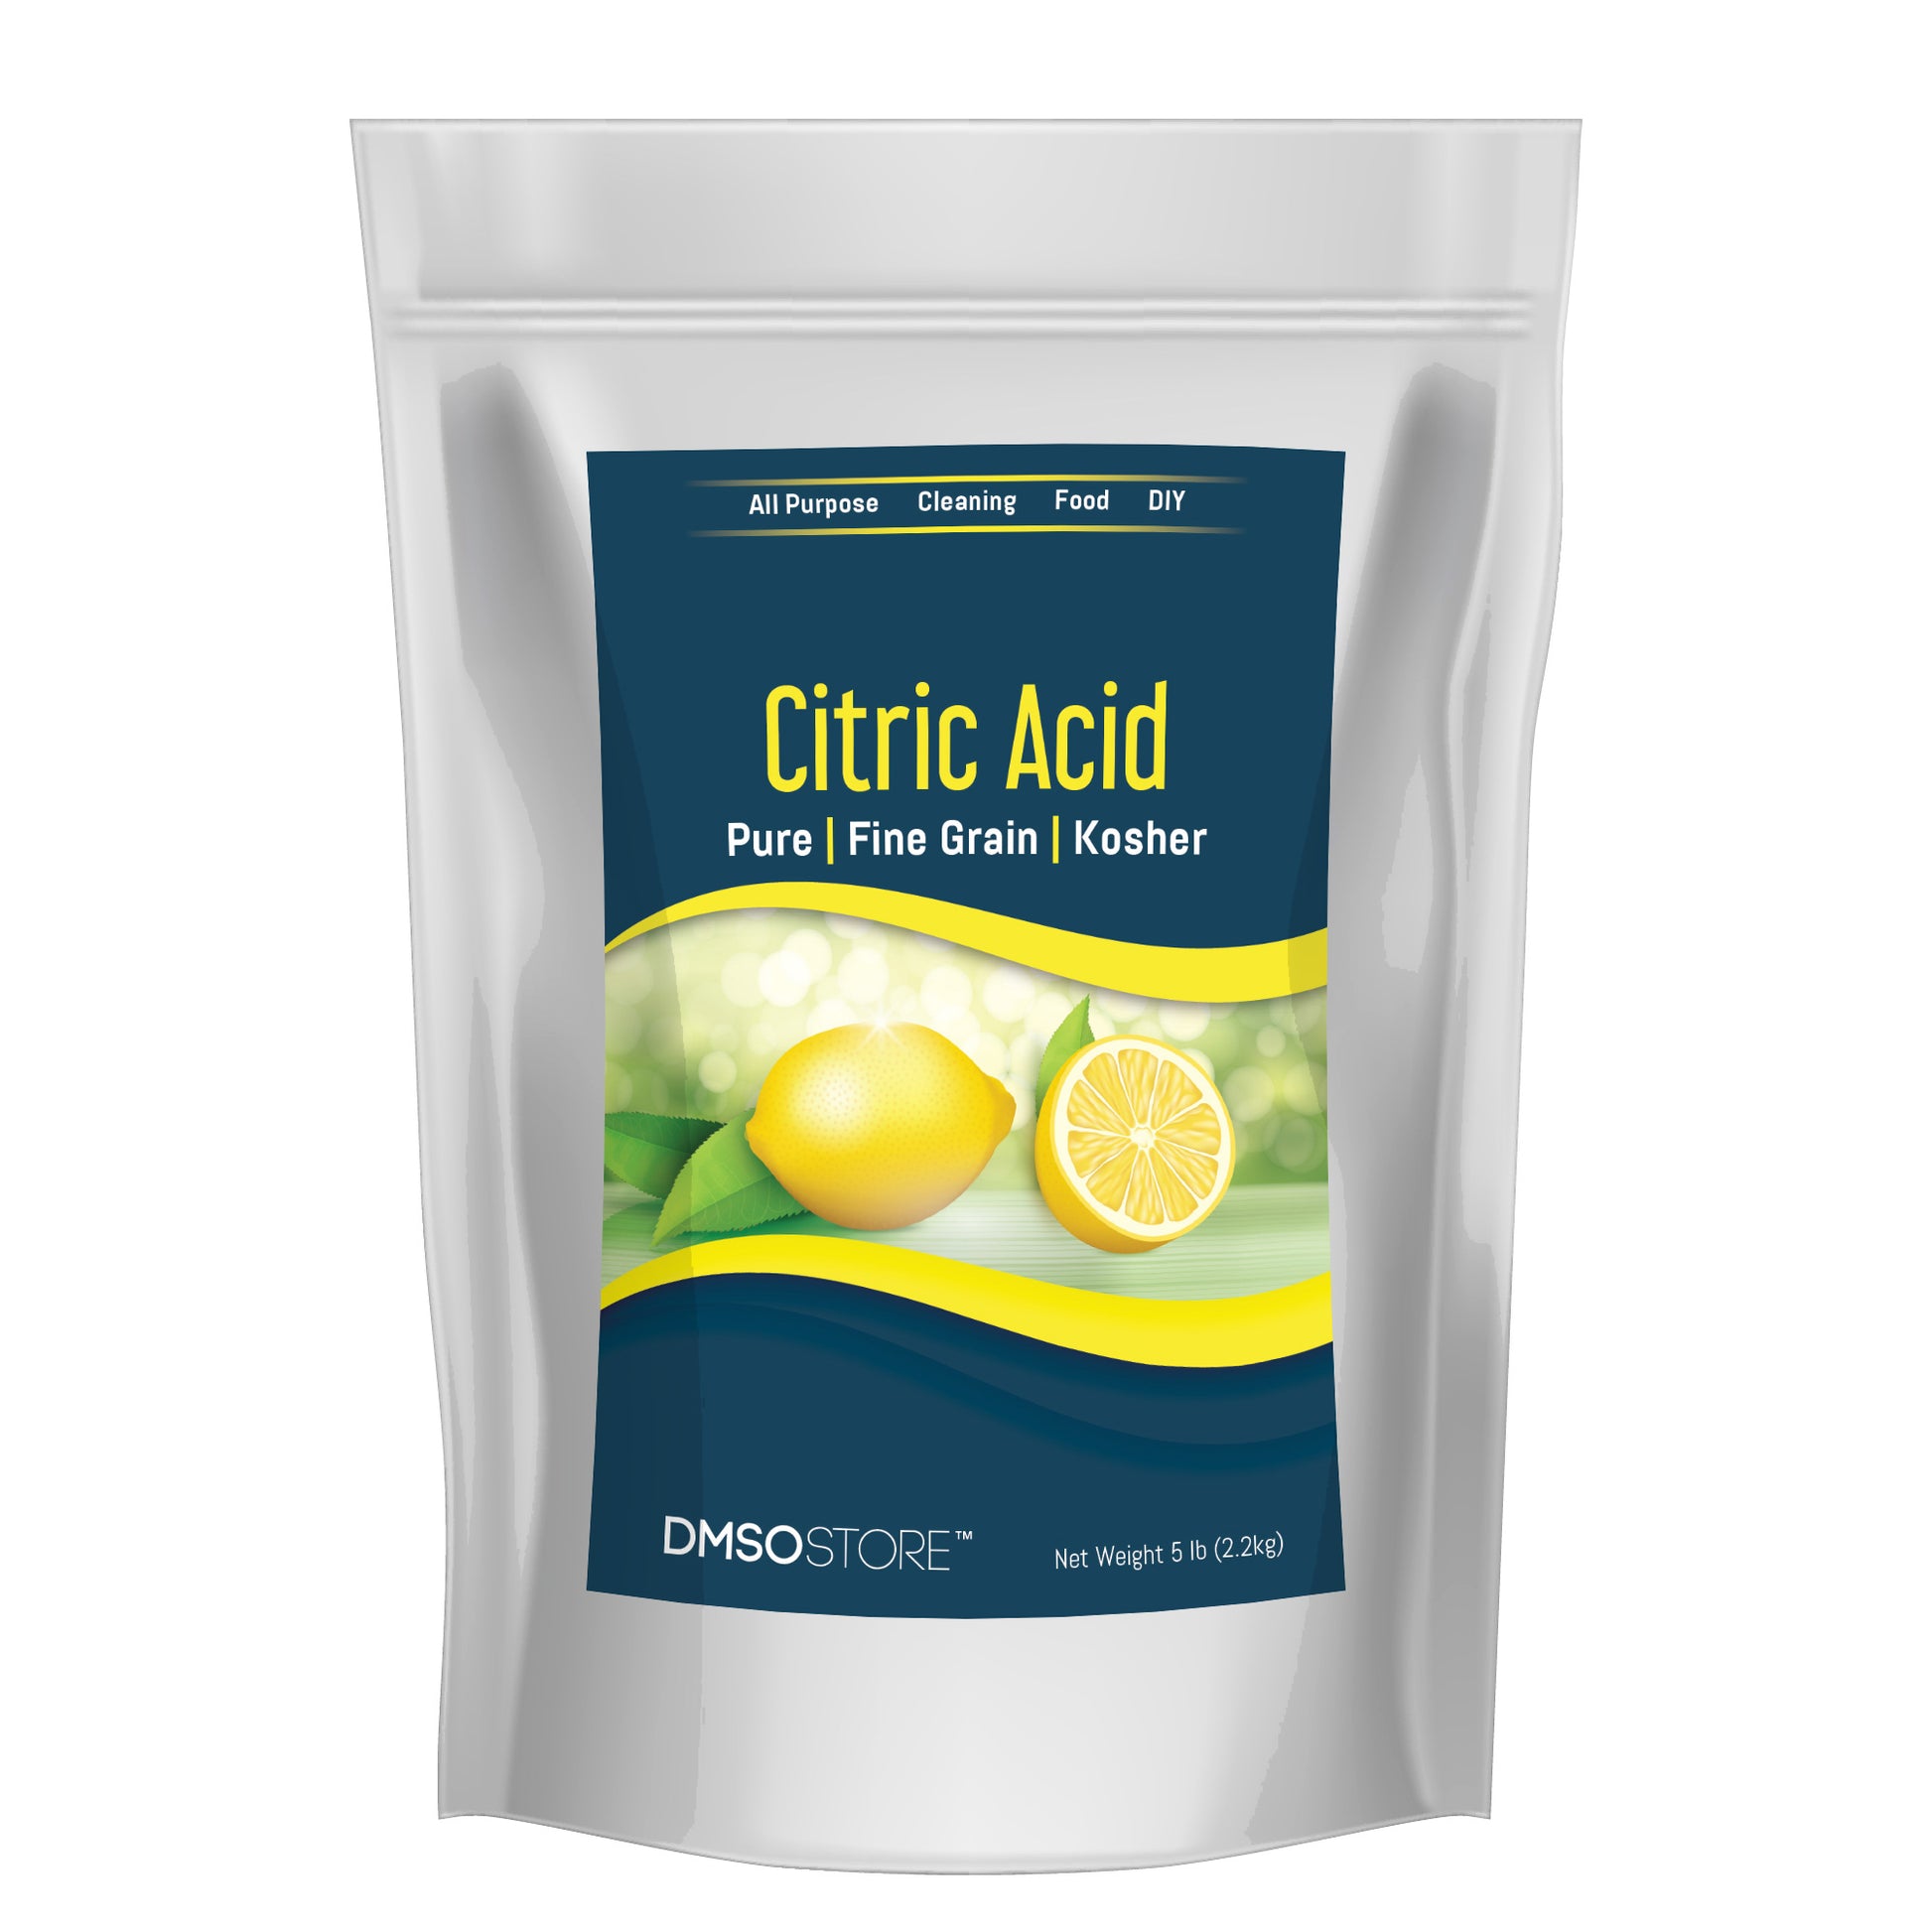 1 package of pure, fine grain, kosher citric acid powder suitable for multiple purposes including cleaning, food preparation, and DIY projects, featuring an image of fresh lemons and the net weight of 5 lb.